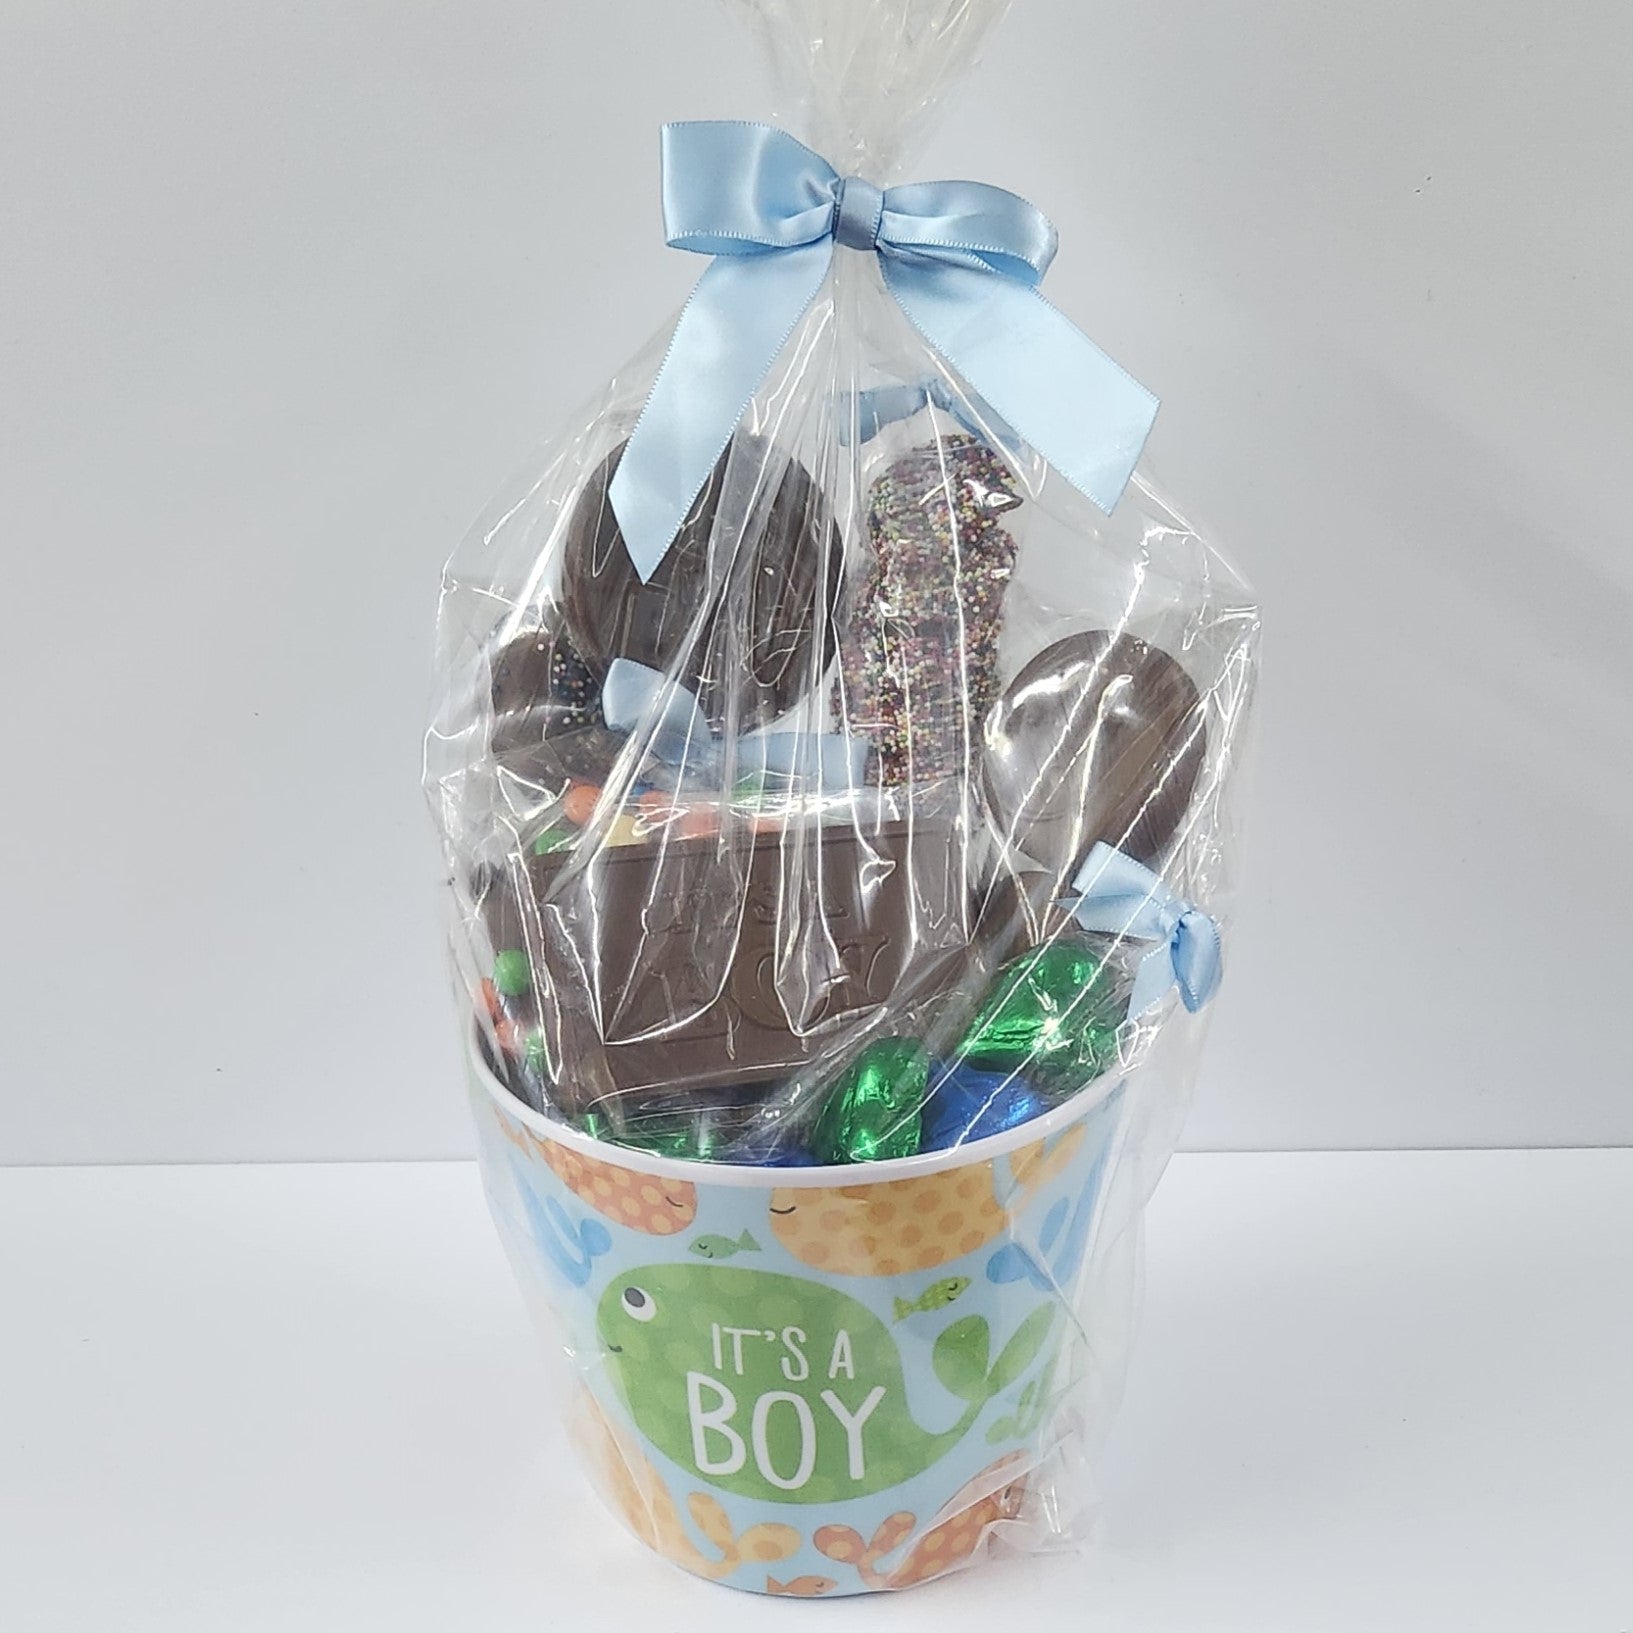 Stage Stop Candy It's a Boy Chocolate Gift Basket wrapped in plastic with a blue bow